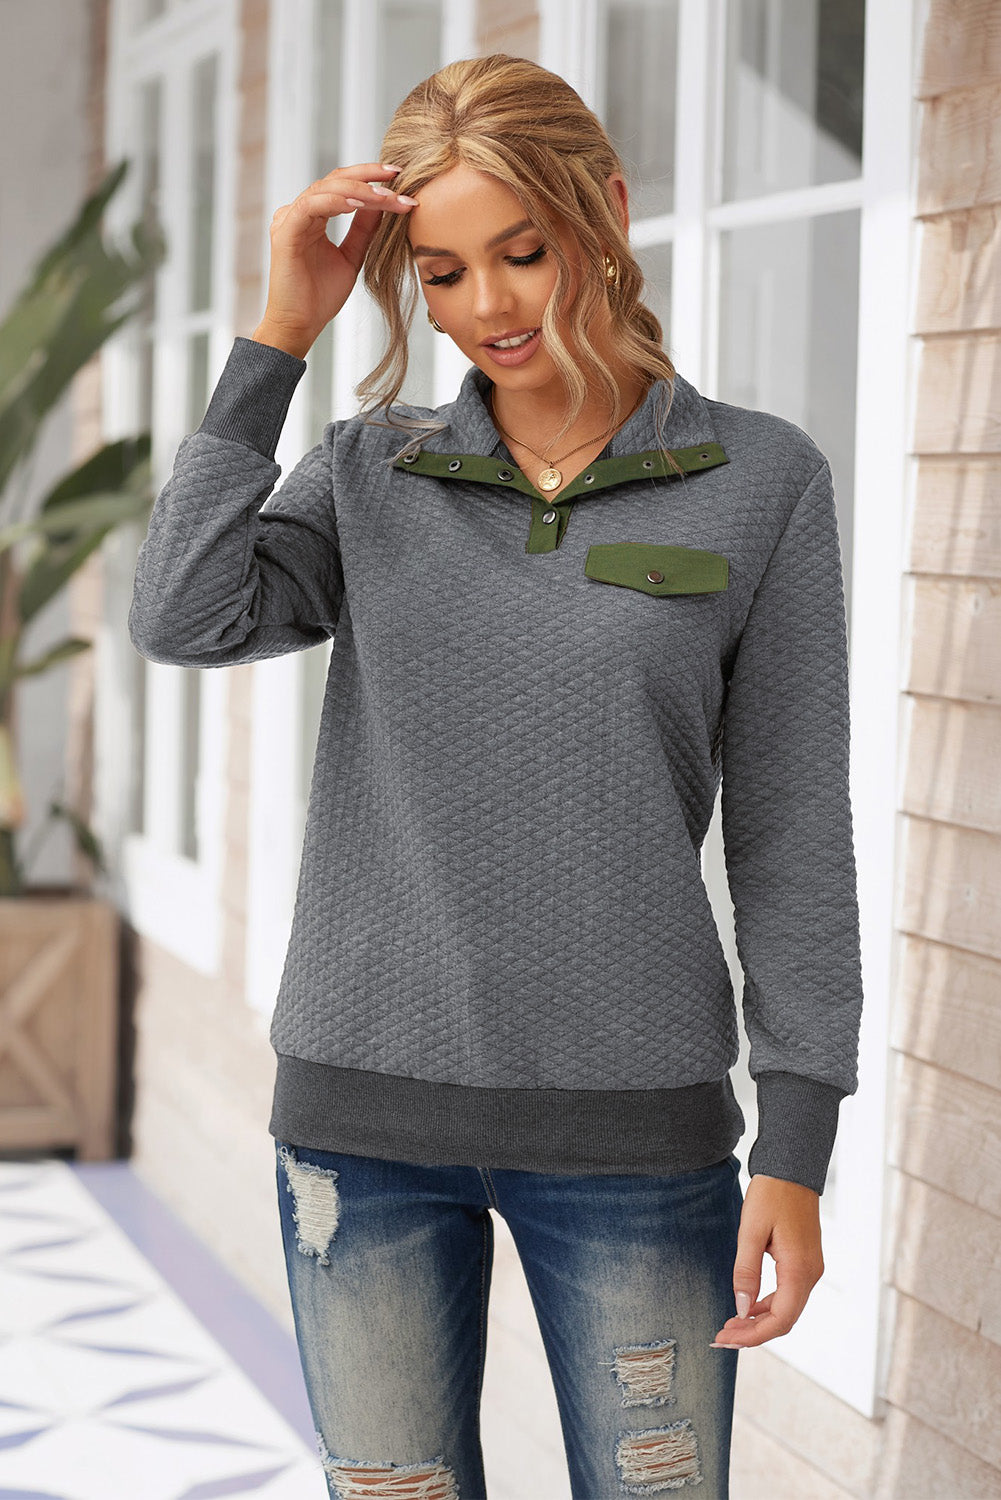 Collared Neck Long Sleeve Top - Women’s Clothing & Accessories - Shirts & Tops - 4 - 2024